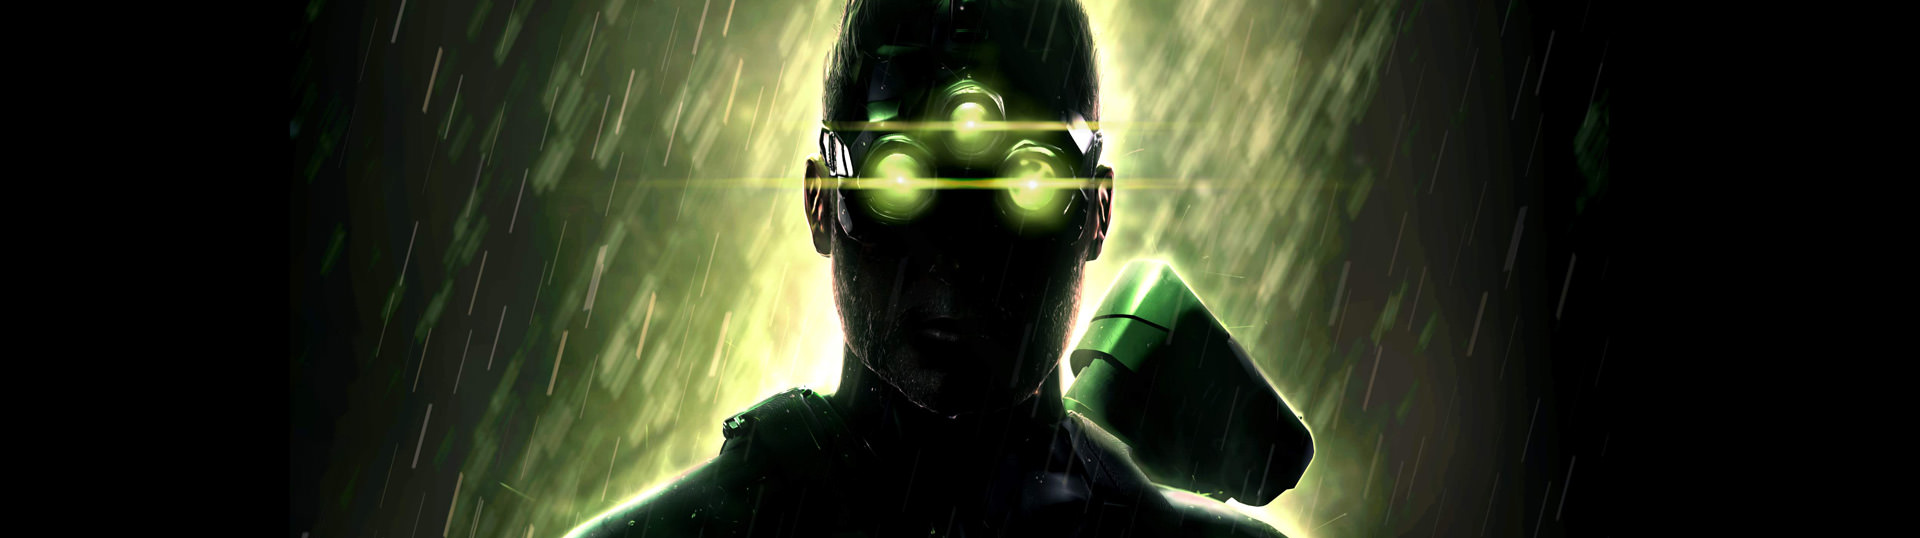 Buy Tom Clancy's Splinter Cell® Chaos Theory™